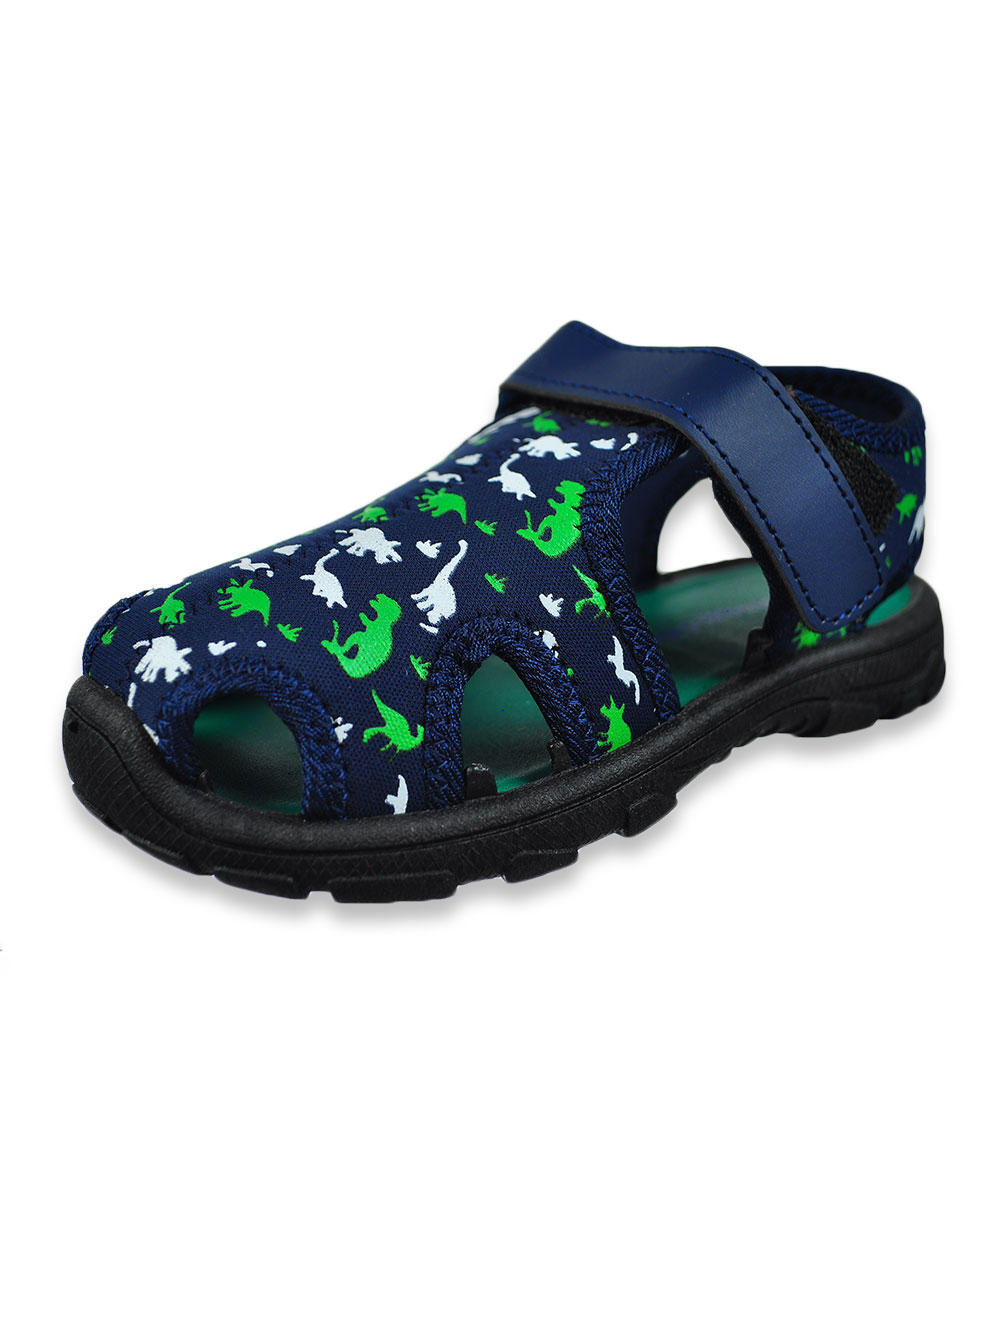 Sandals Water Shoes